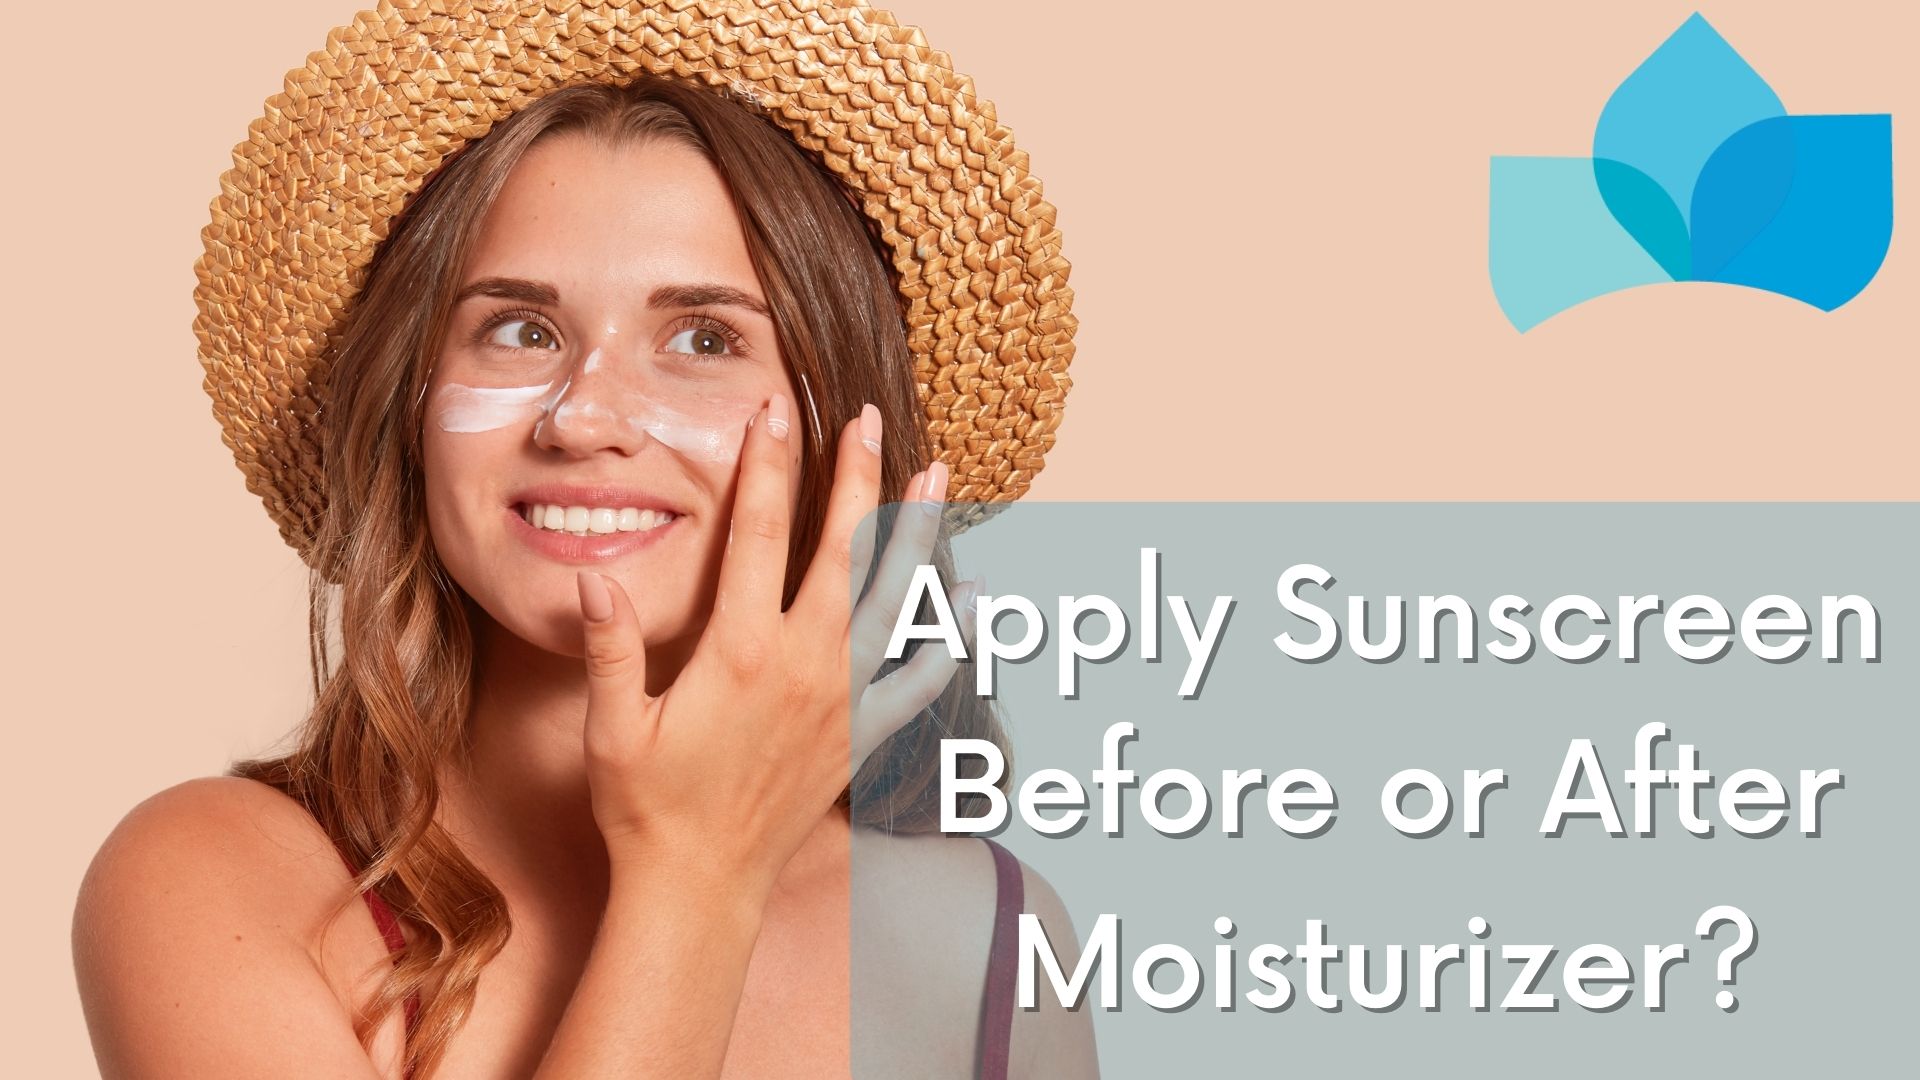 Apply Sunscreen Before or After Moisturizer? by Edmonton Dermatology